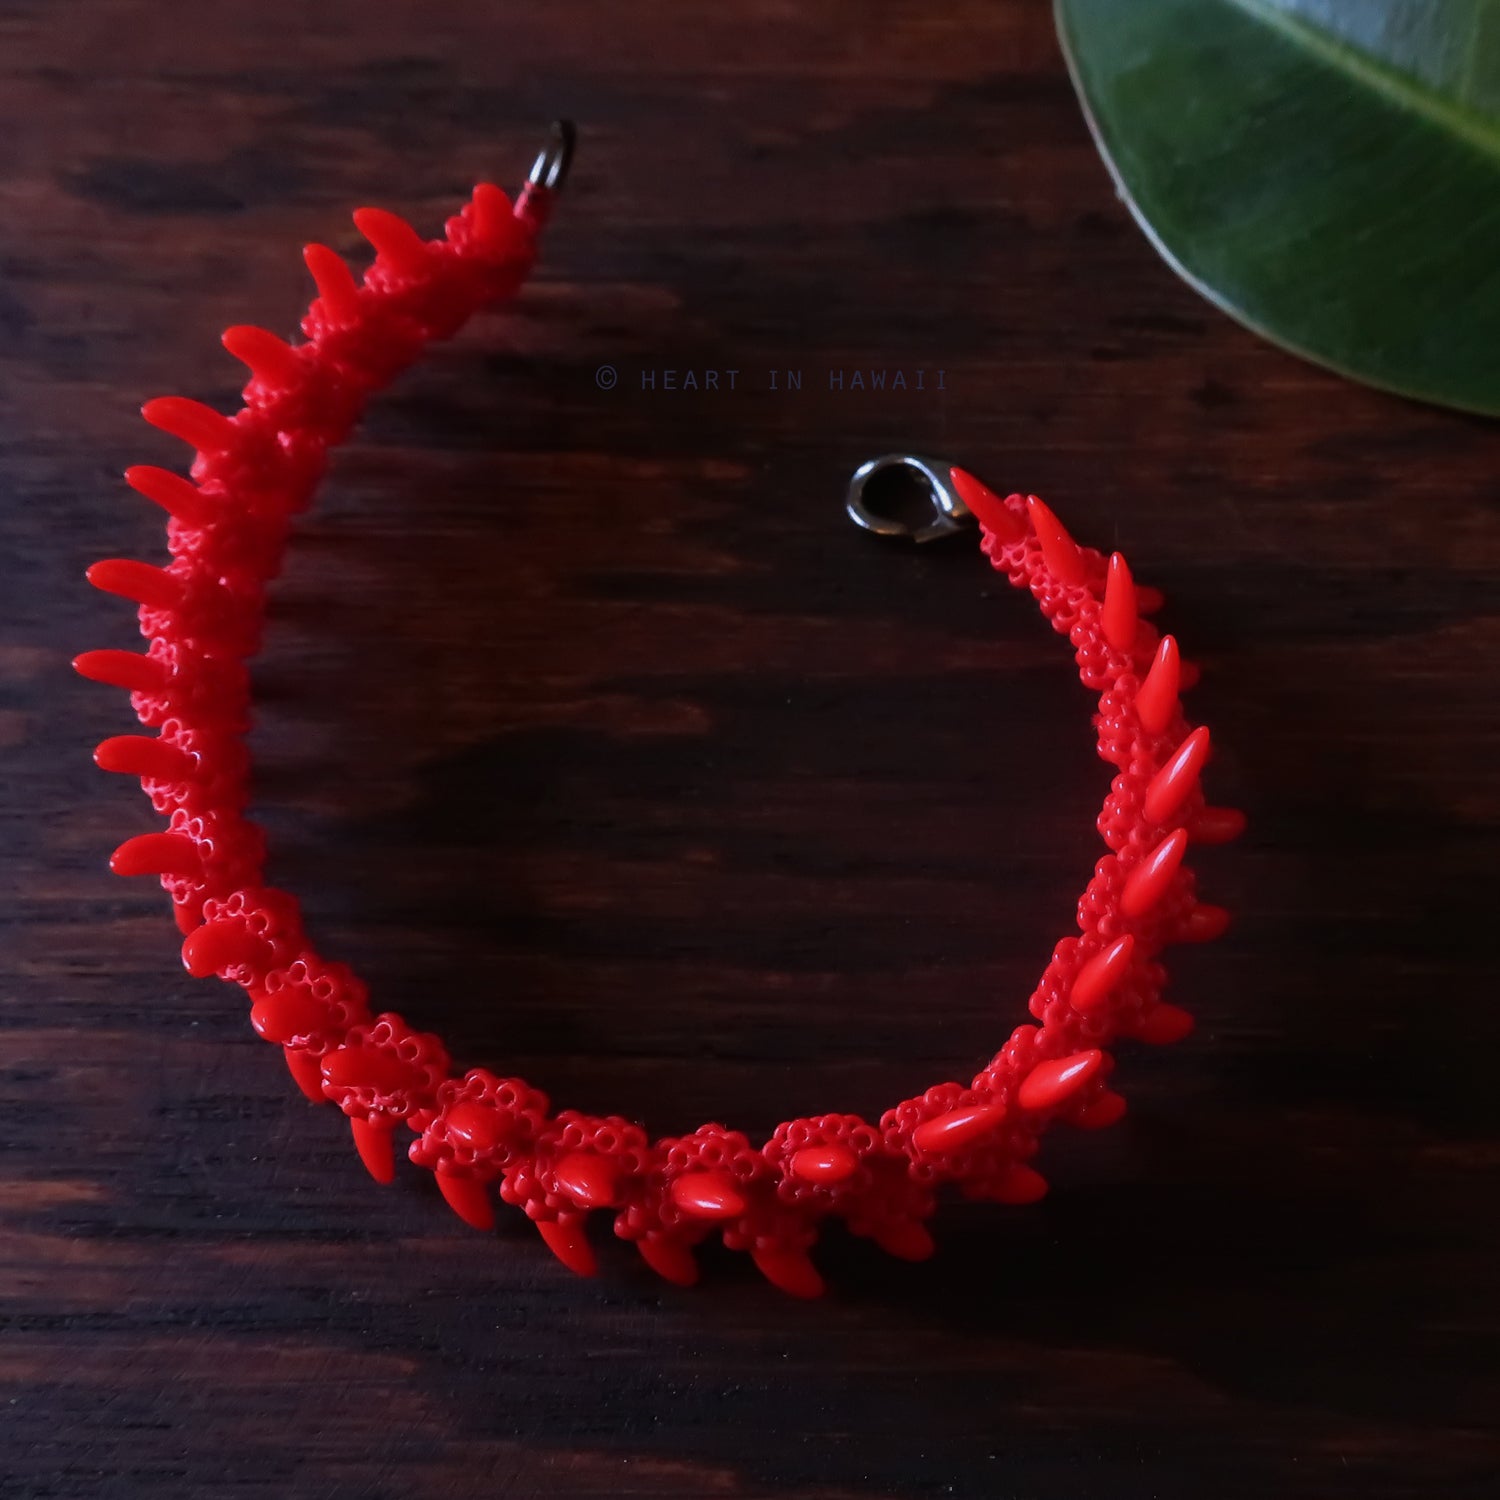 Heart in Hawaii Beaded Heliconia Bracelet - Opaque Red